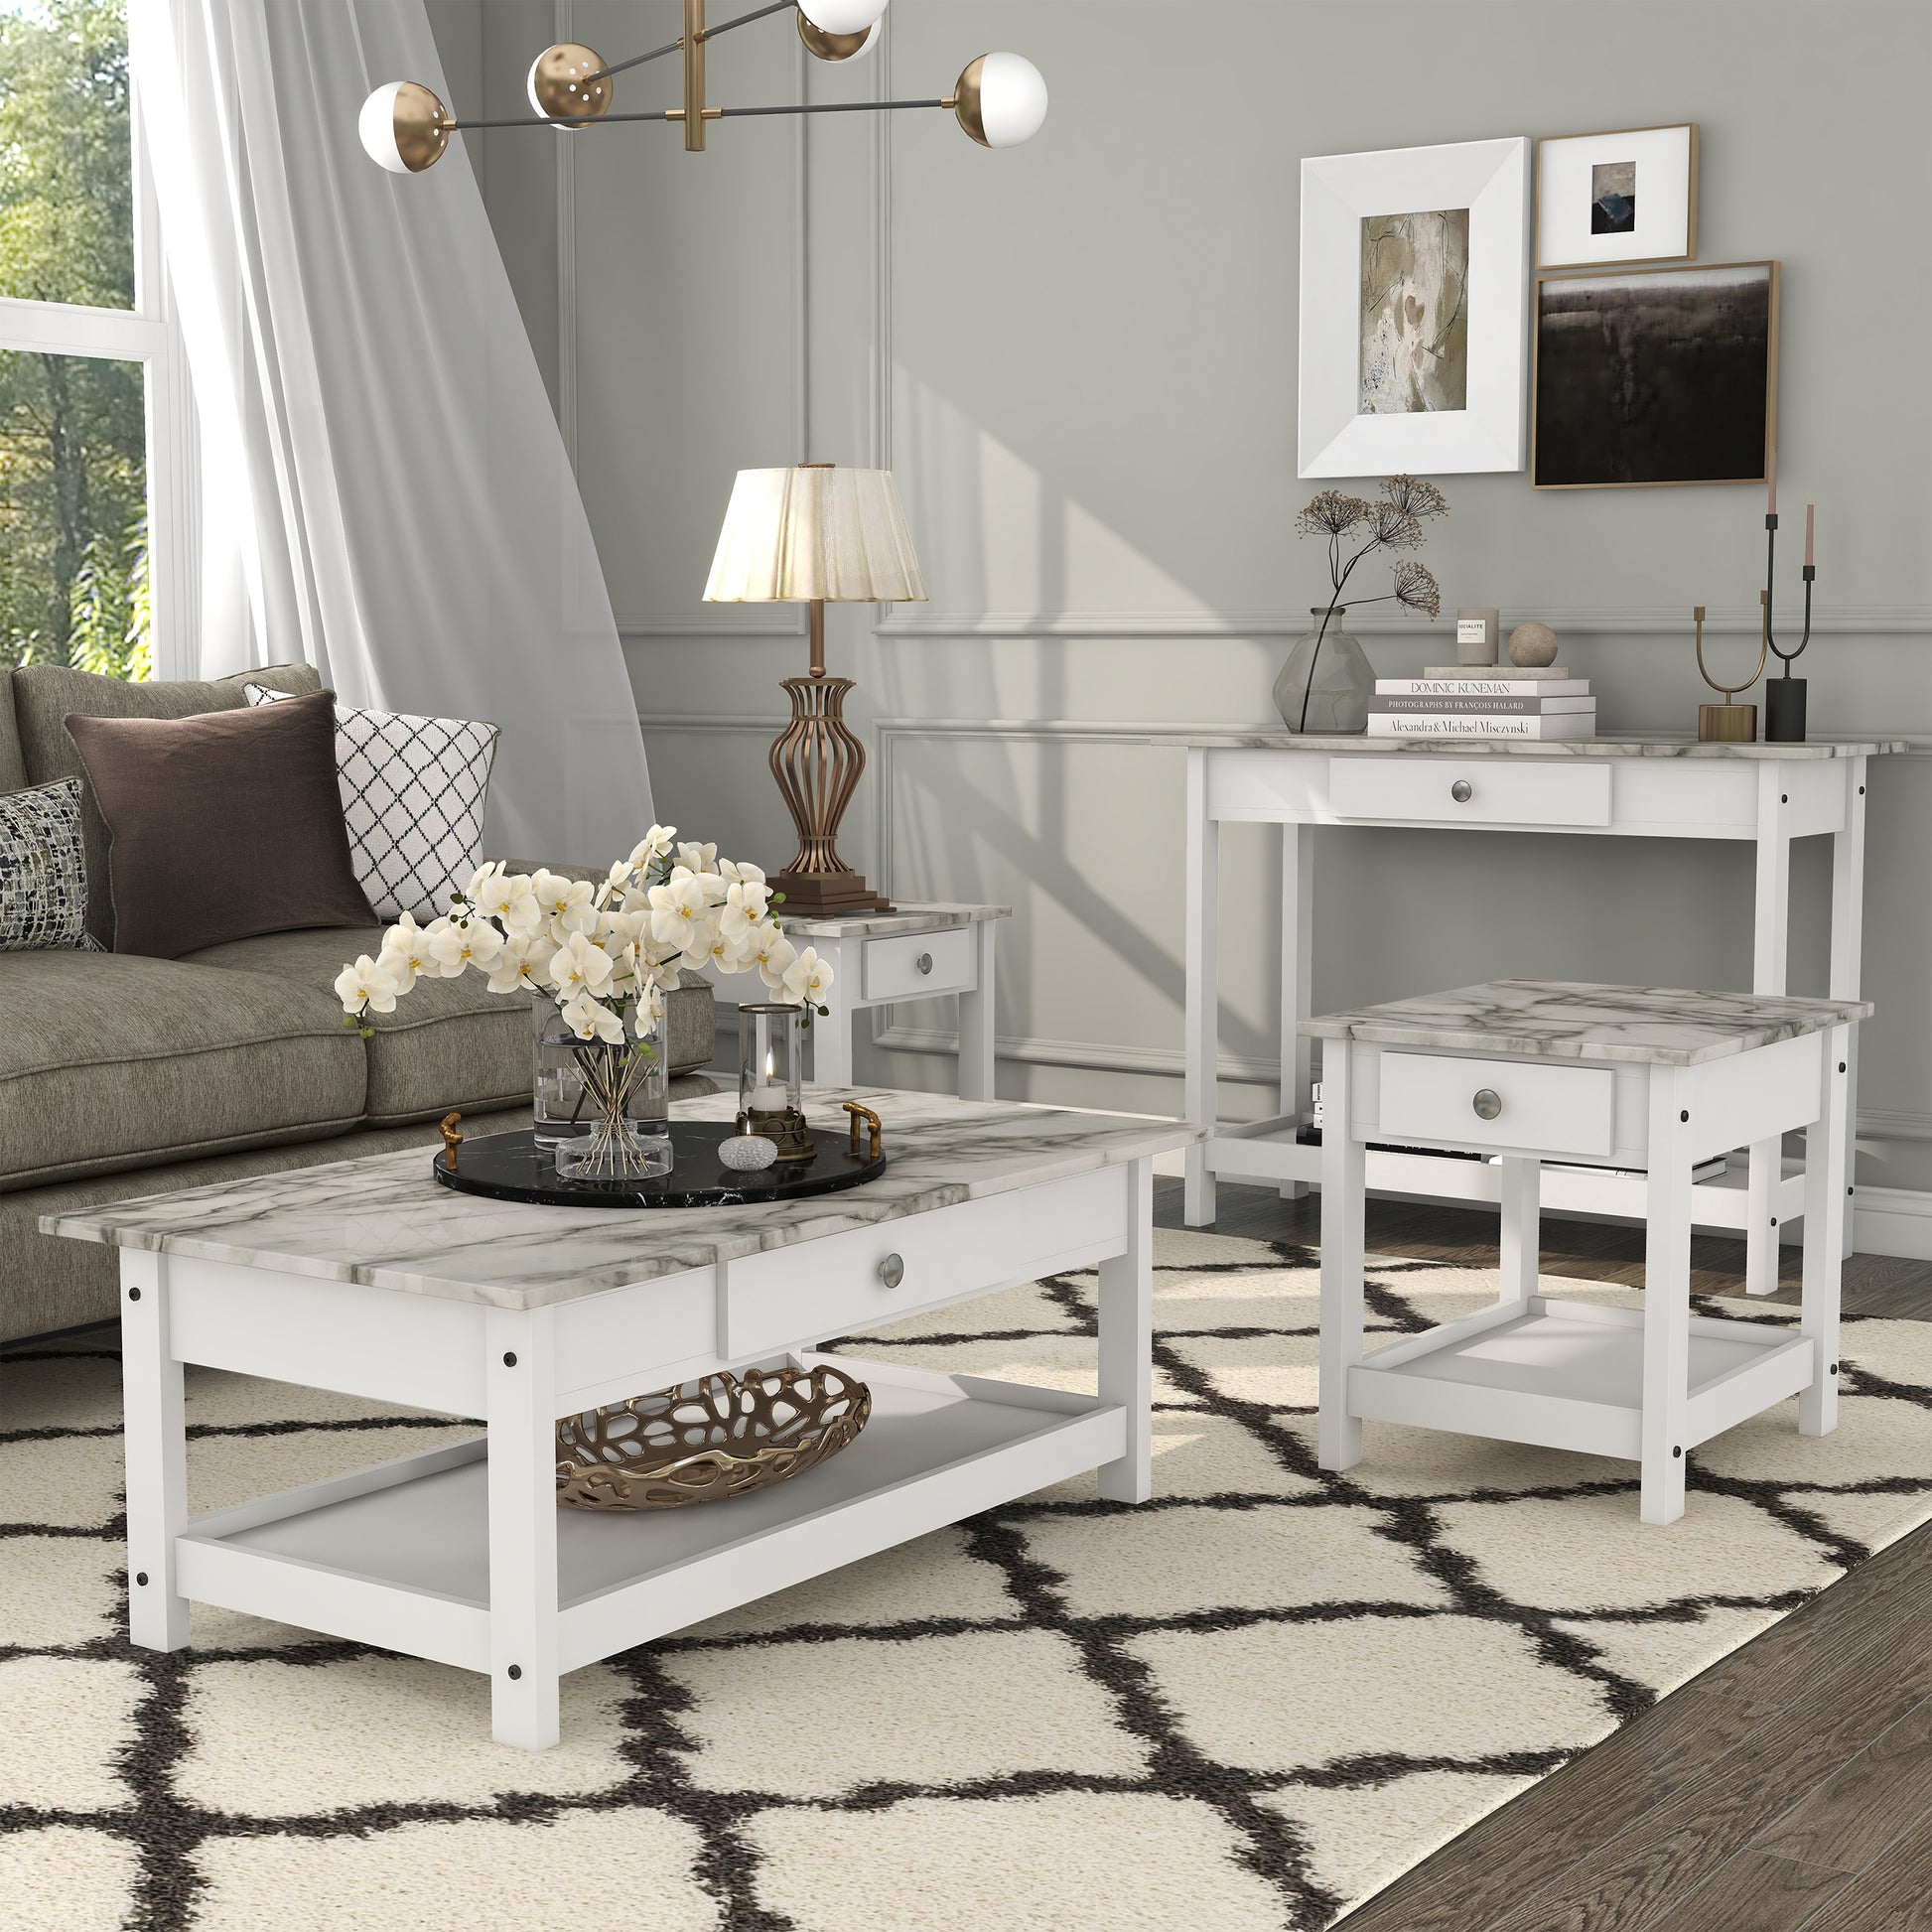 Right angled four-piece modern white and faux marble coffee table set with lower shelves in a living area with accessories